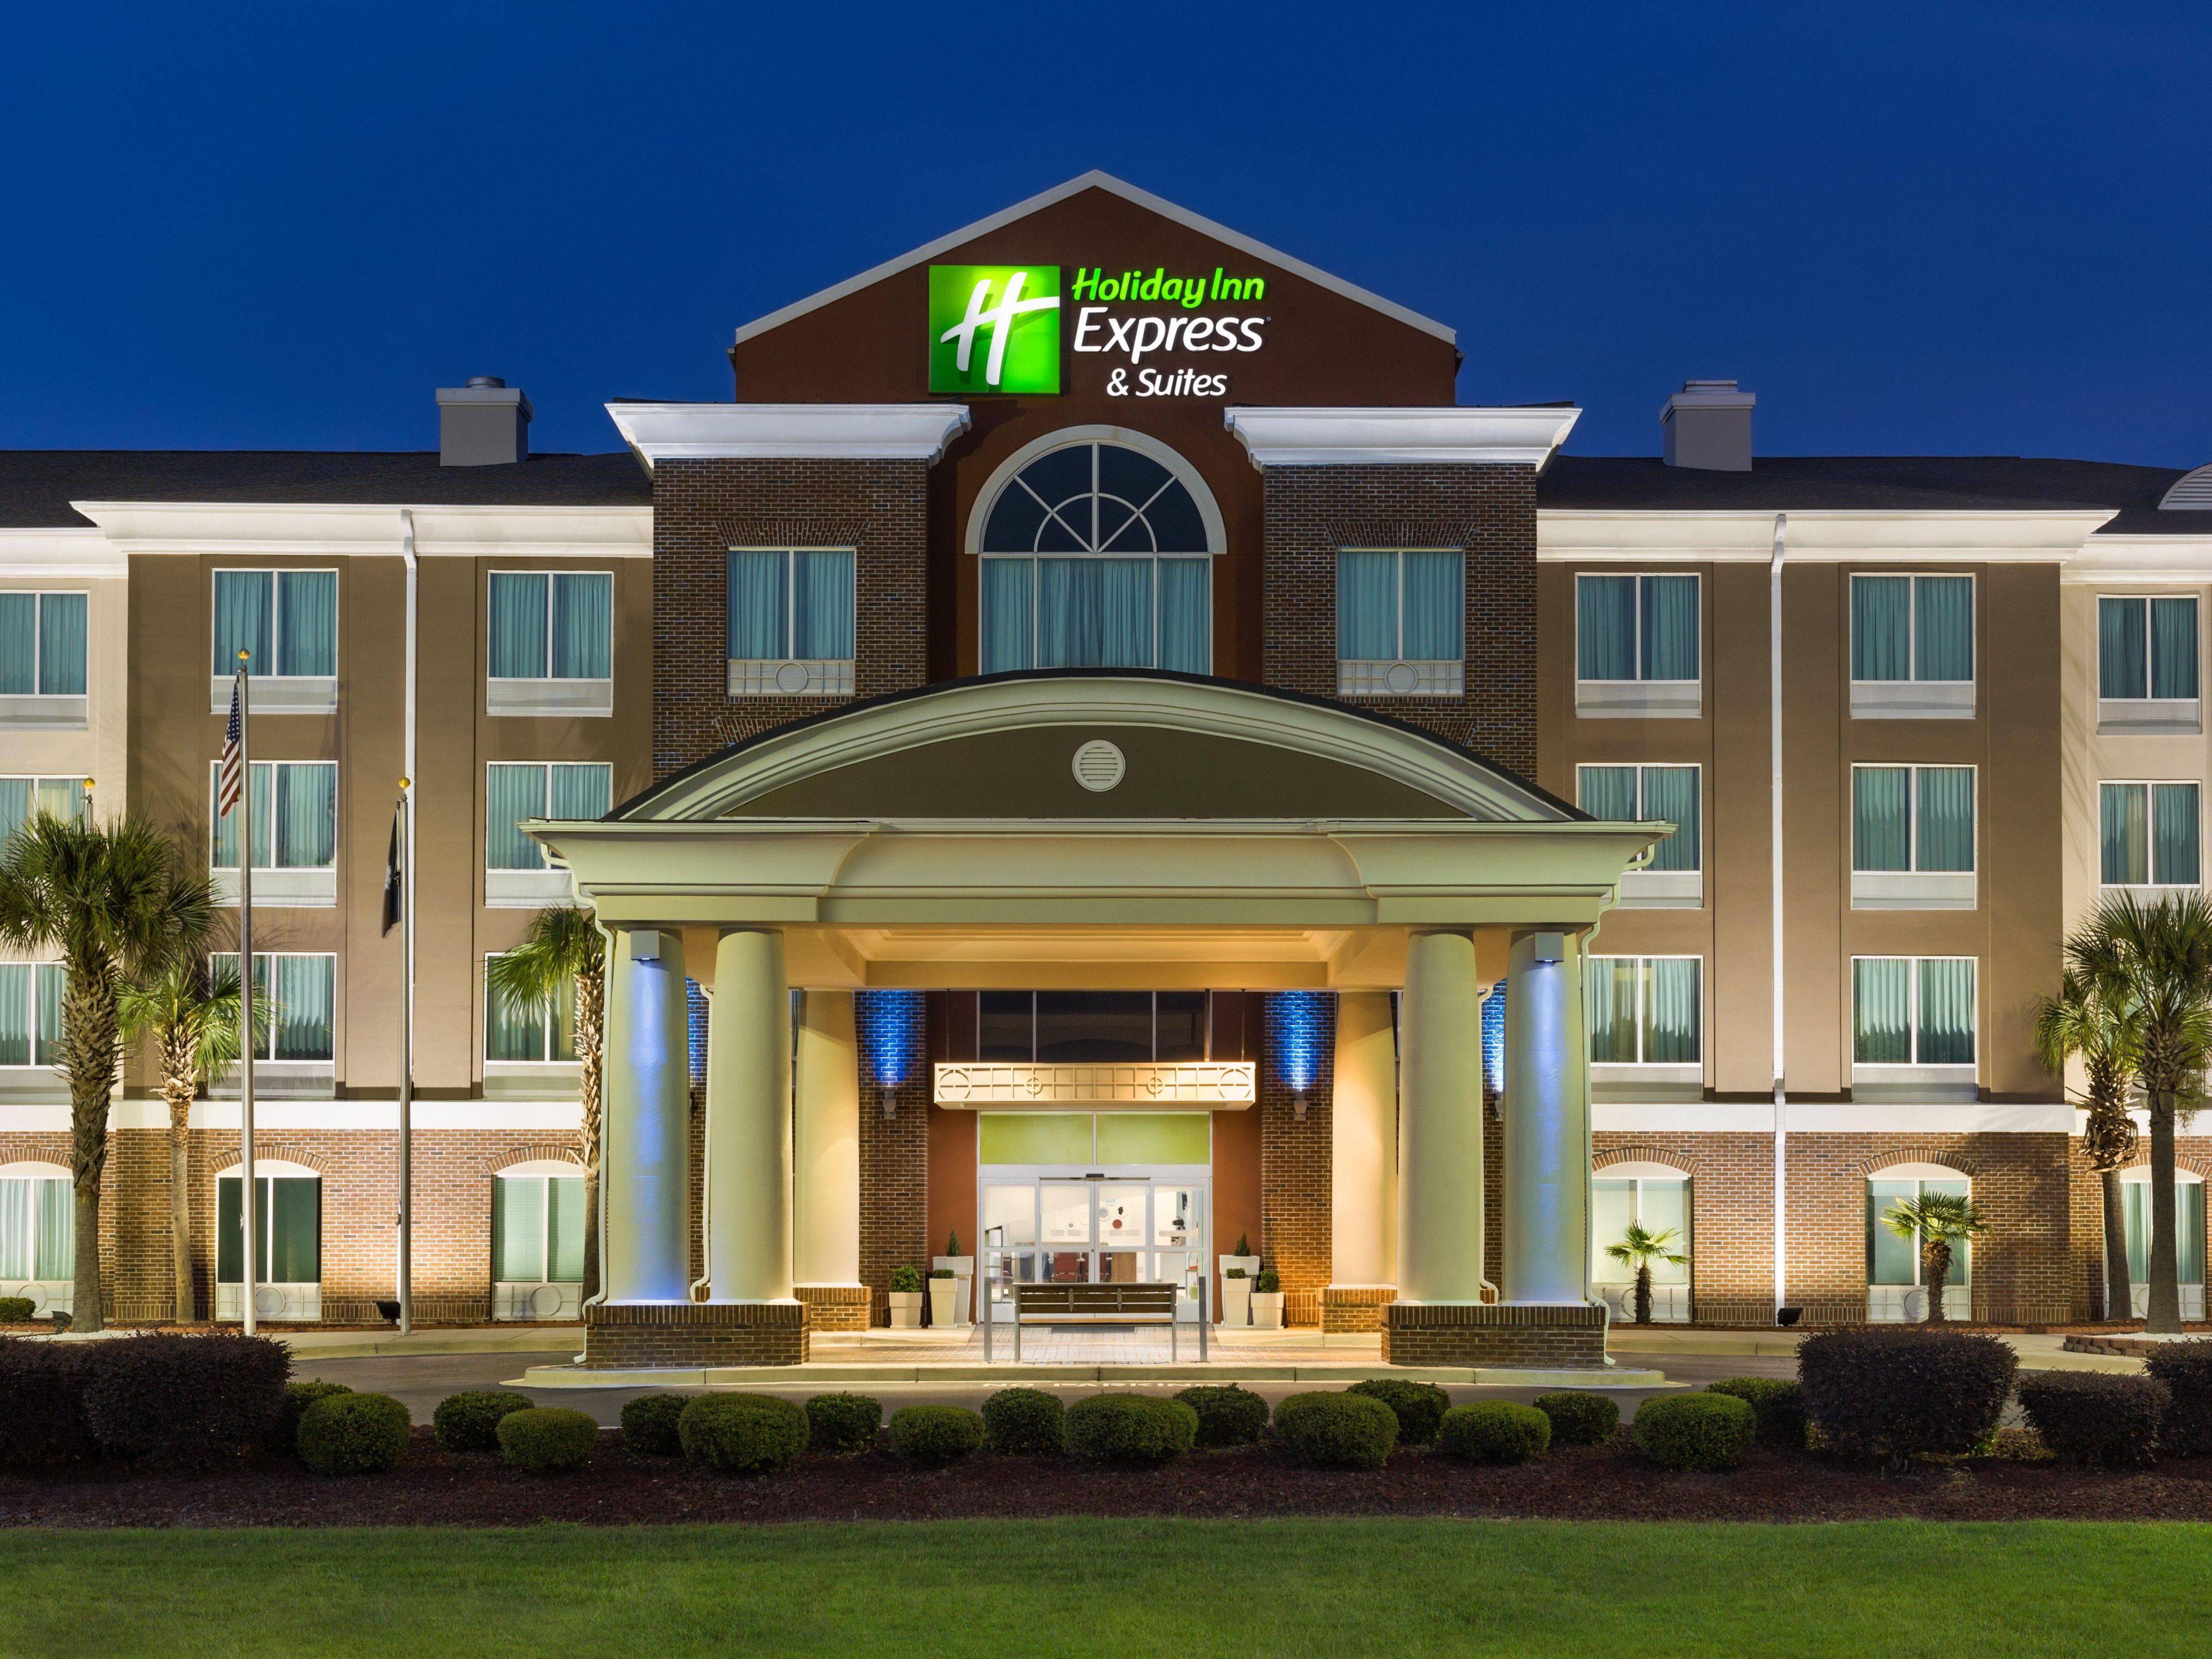 Holiday Inn Express And Suites Florence 4674023848 4x3